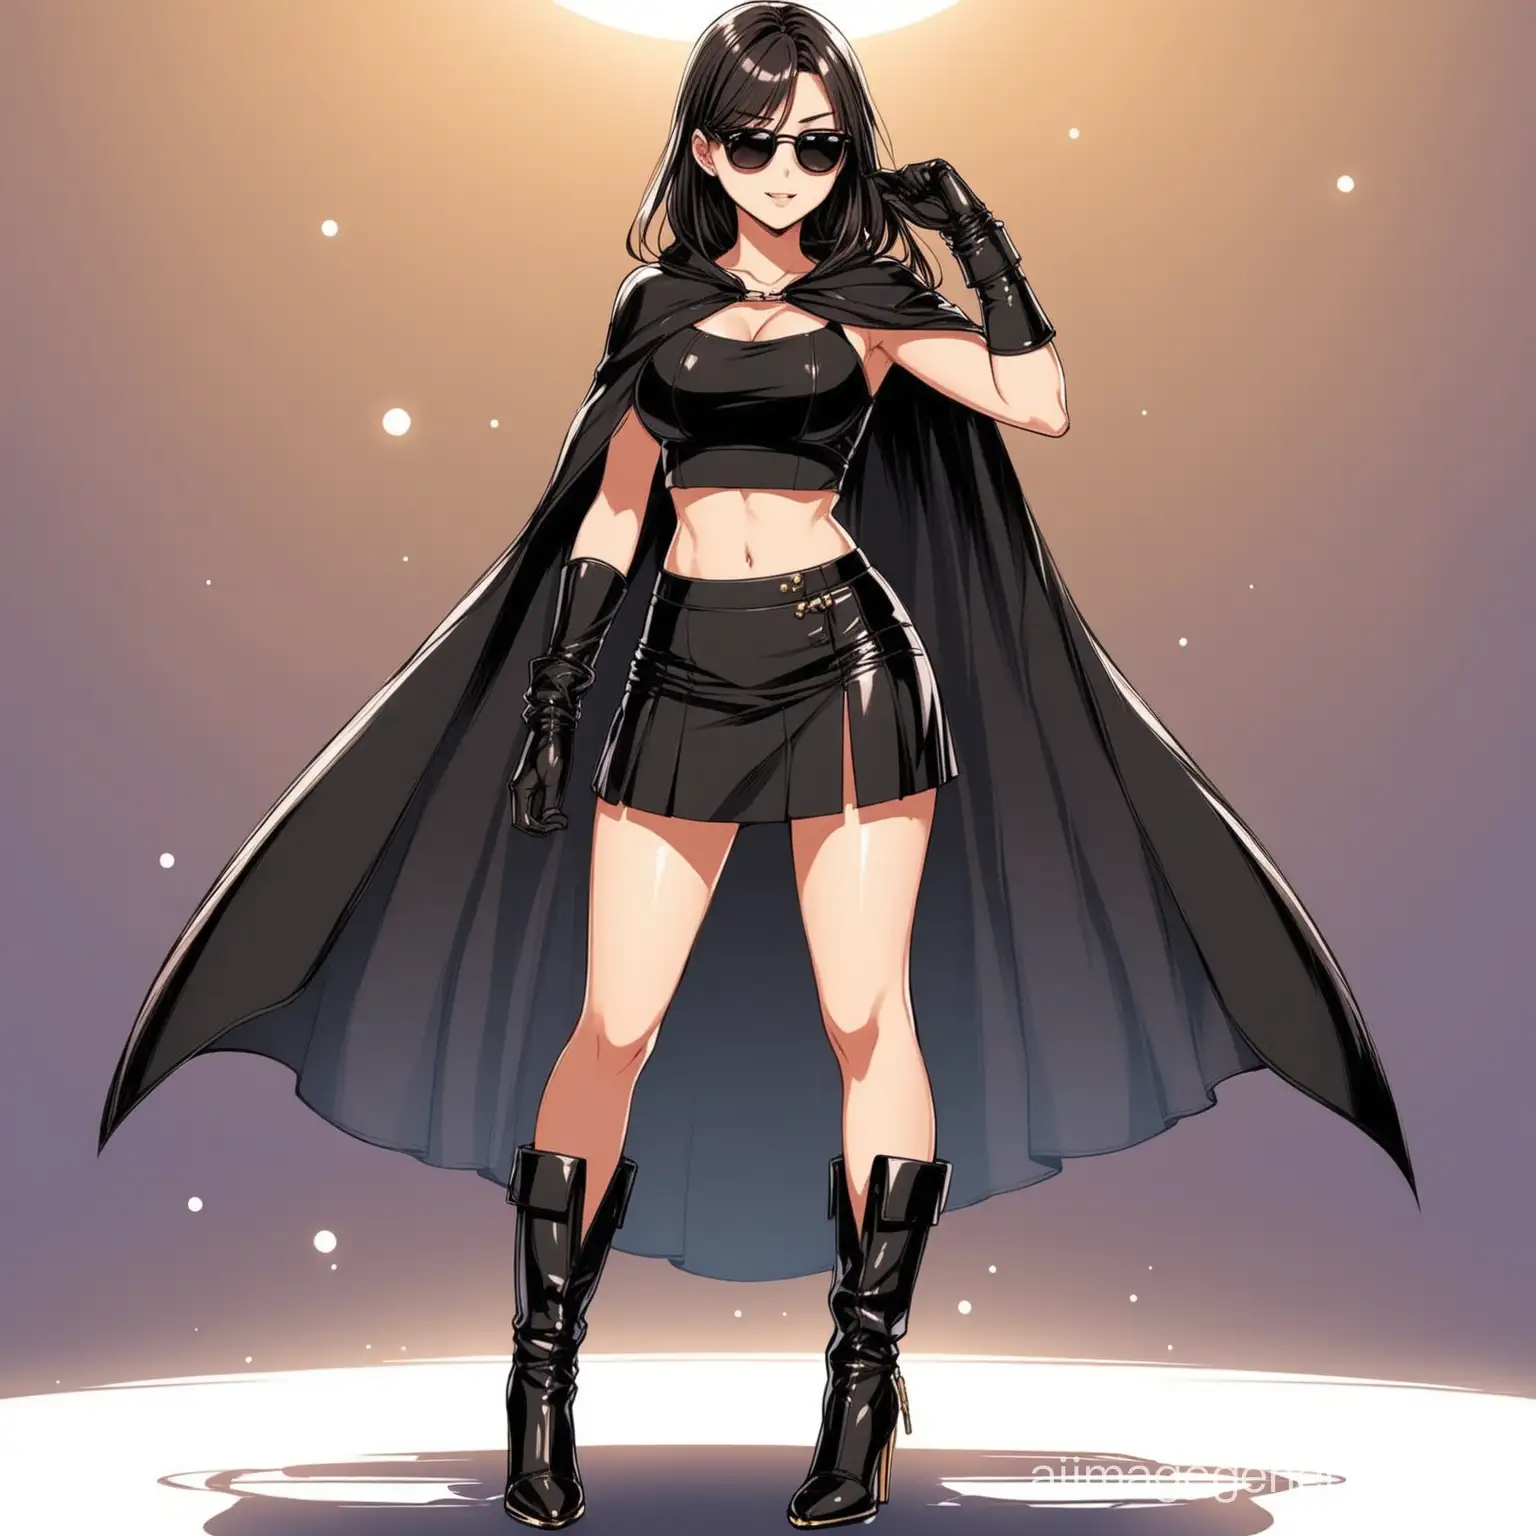 Stylish-Anime-Girl-Fashion-with-Modern-Twist-Croptop-Skirt-Gloves-Boots-Cape-and-Shades